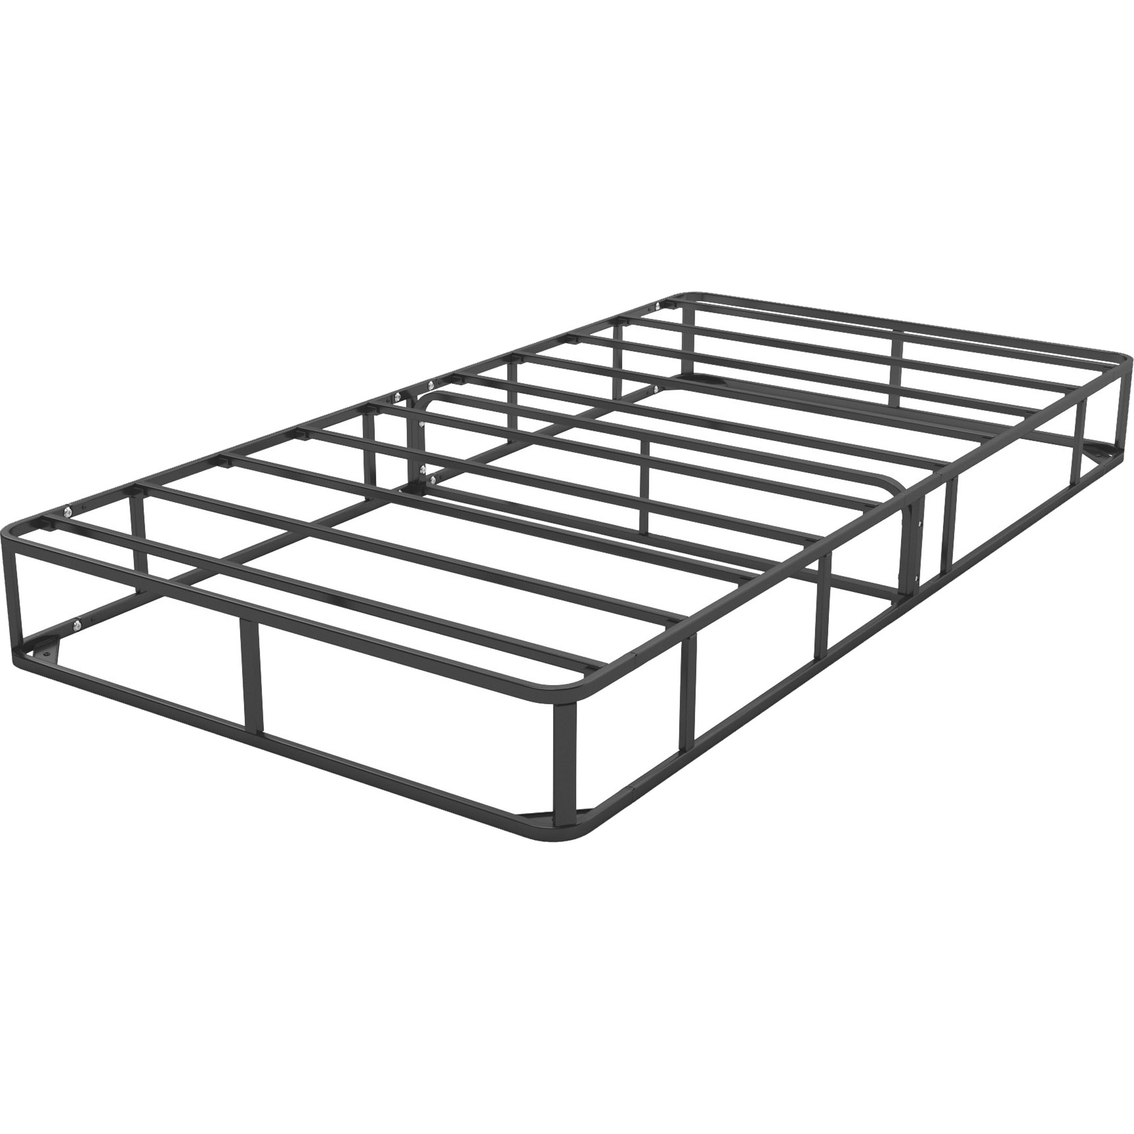 CorLiving SAL-102-F Ready-to-Assemble Full/Double Box Spring - Image 2 of 5